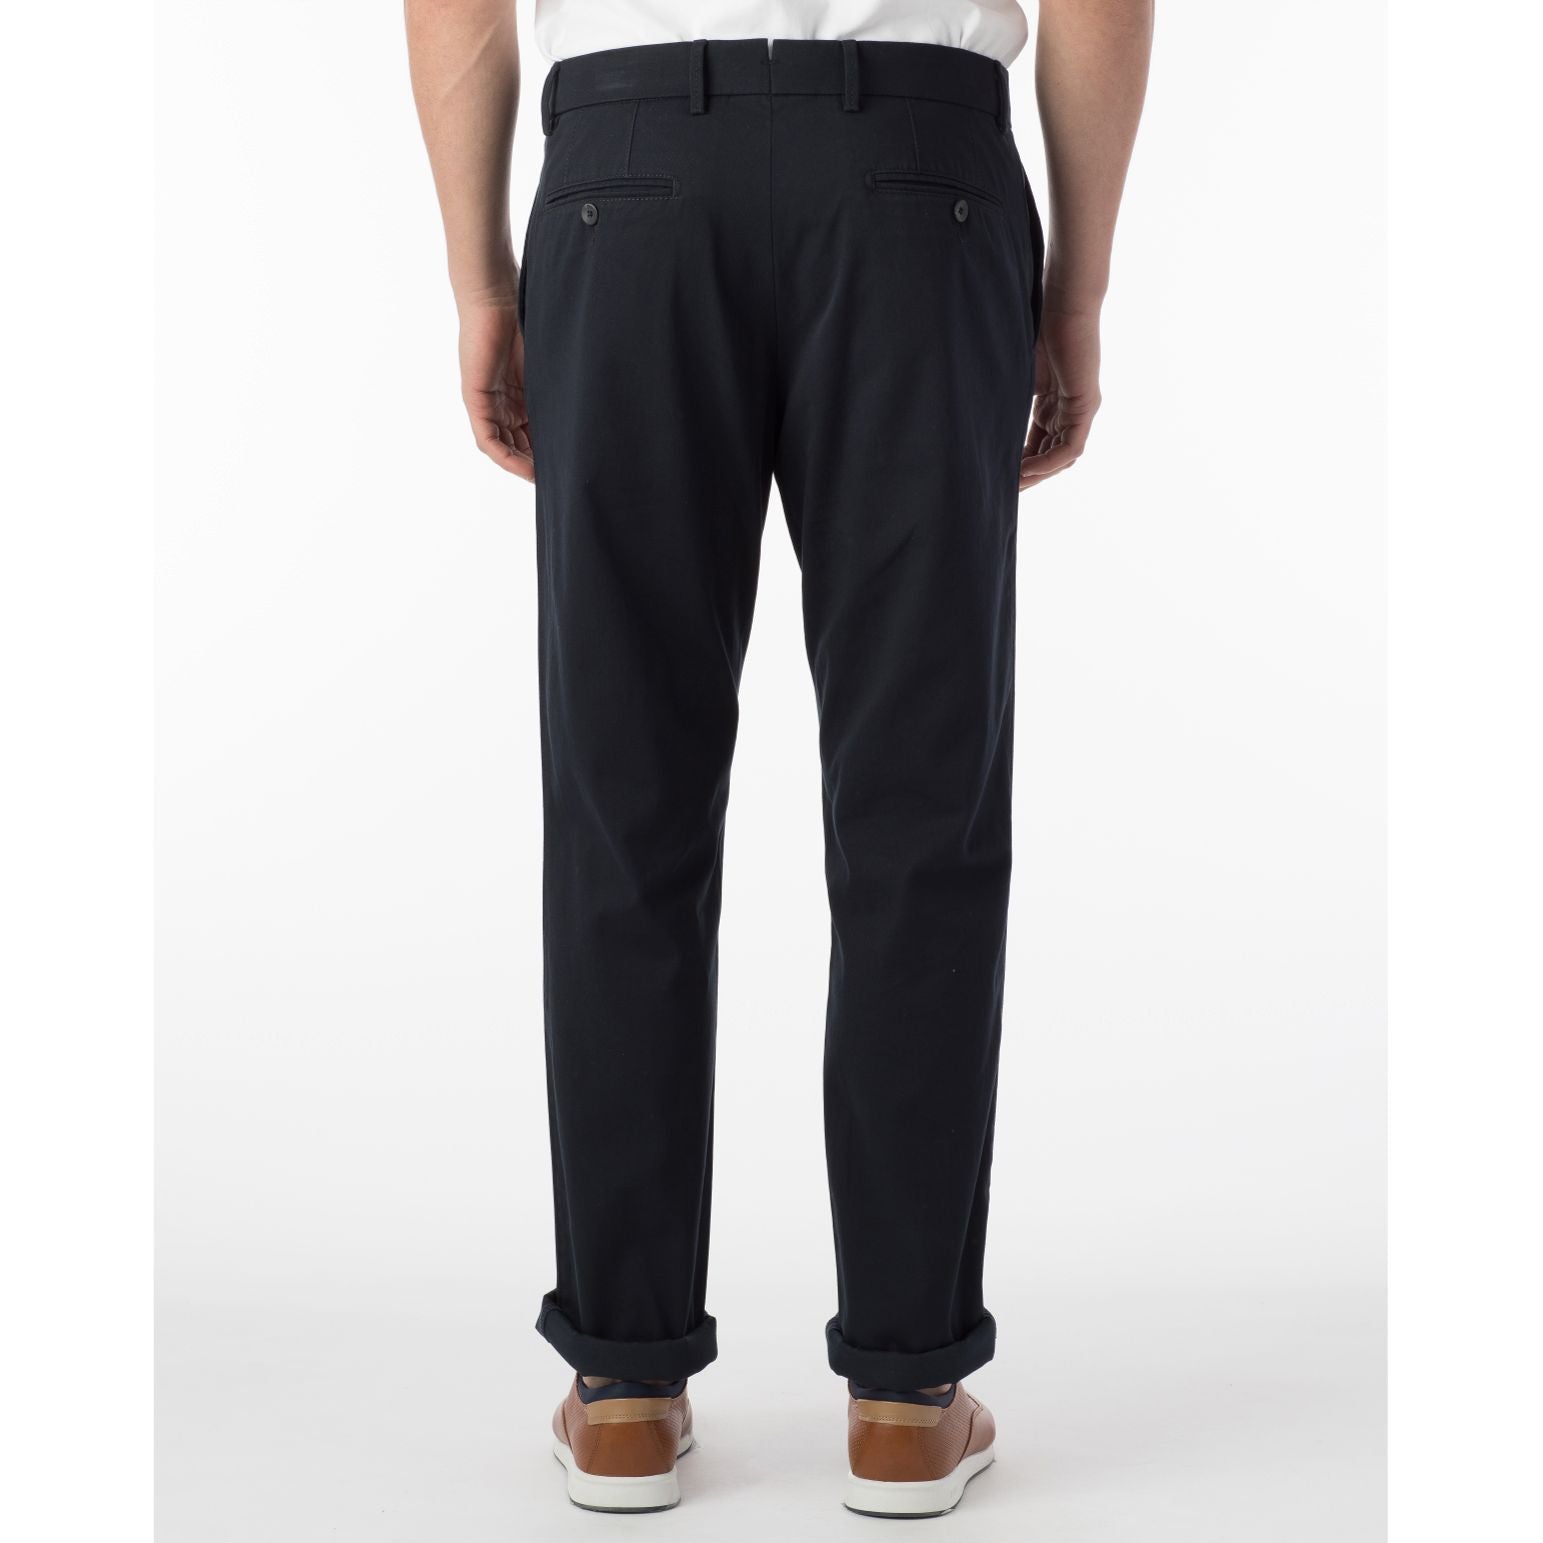 Perma Color Pima Twill Khaki Pants in Navy (Flat Front Models) by Ballin